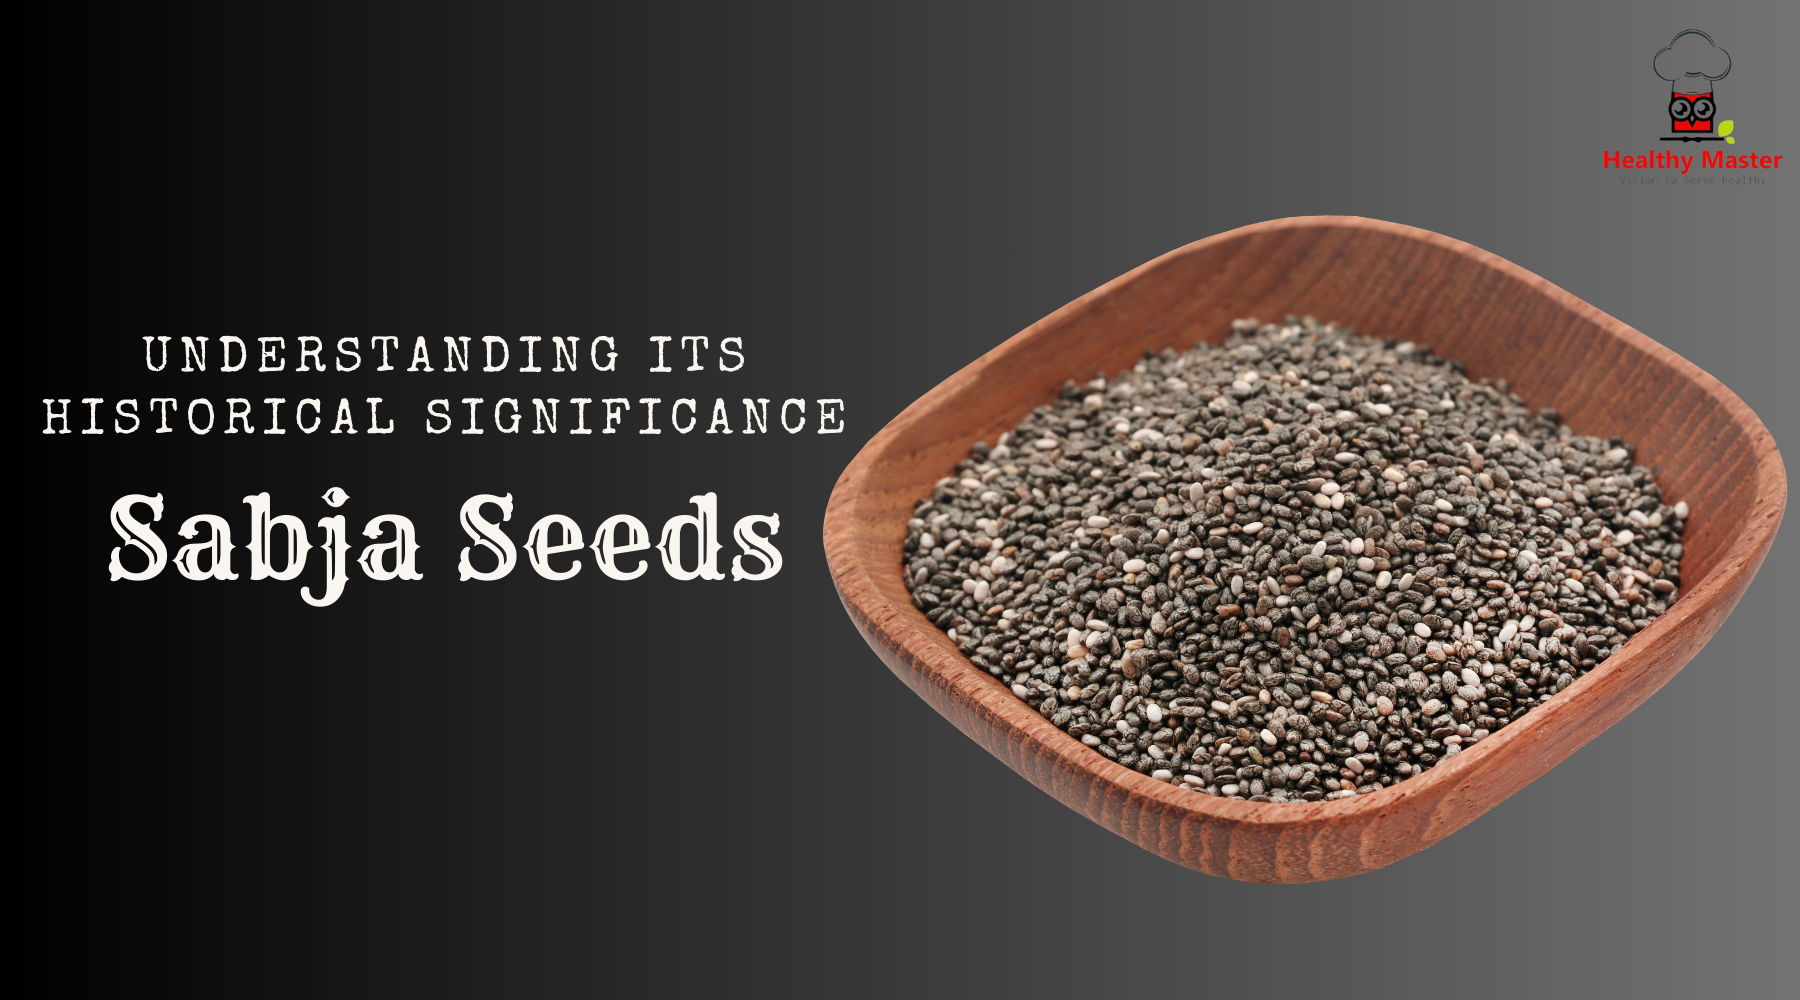 Sabja seeds: Benefits, nutrition, and recipes